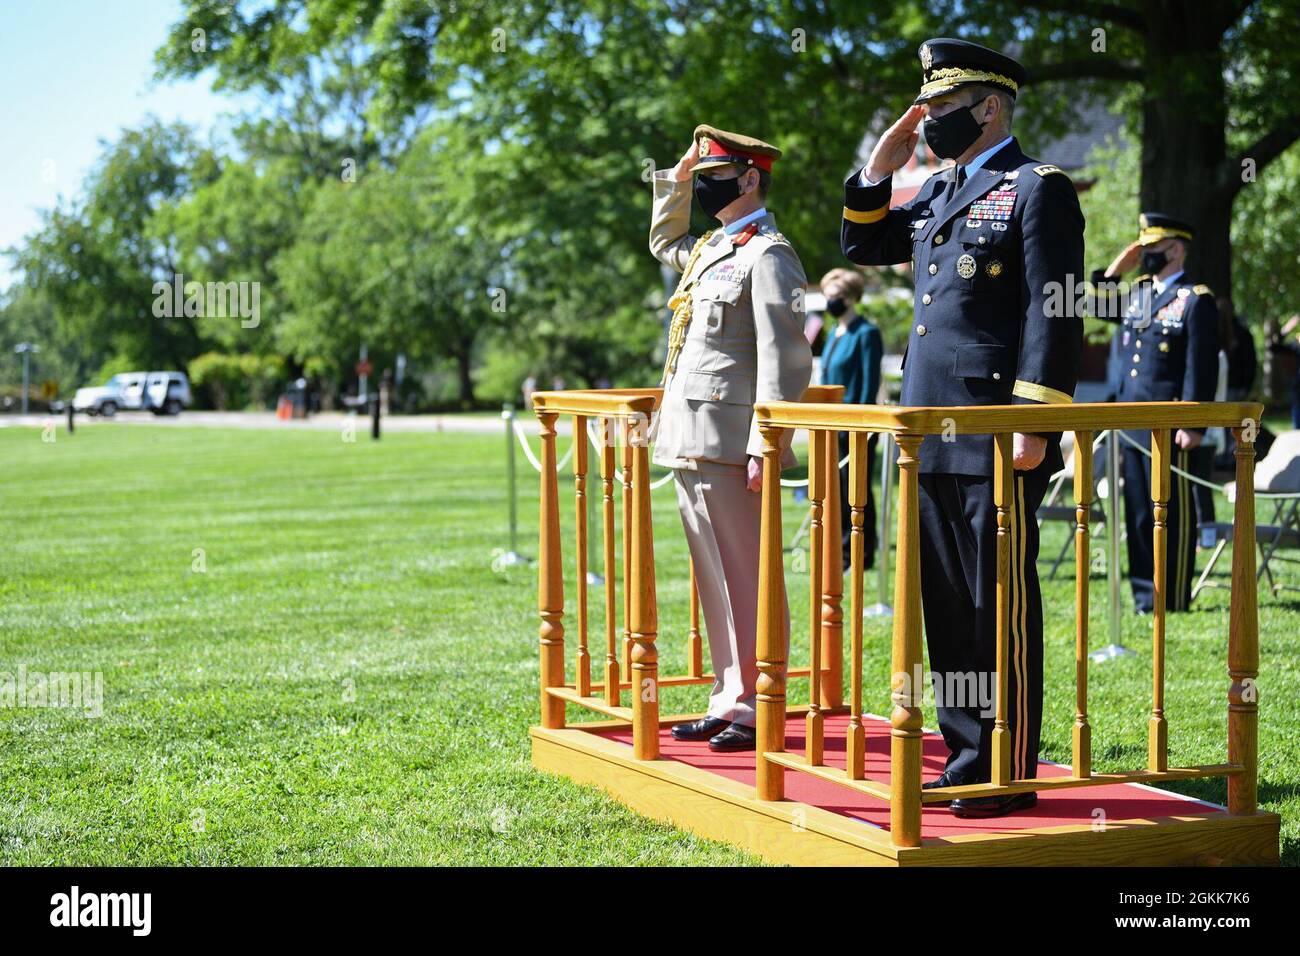 Chief of Staff of the U.S. Army Gen. James C. McConville and General Sir Mark Alexander Carleton-Smith, the chief of the General Staff of the British Army, render honors during an Army Full Honor Arrival Ceremony at Whipple Field, Joint Base Myer-Henderson Hall, Arlington, Va., May 13, 2021. Stock Photo